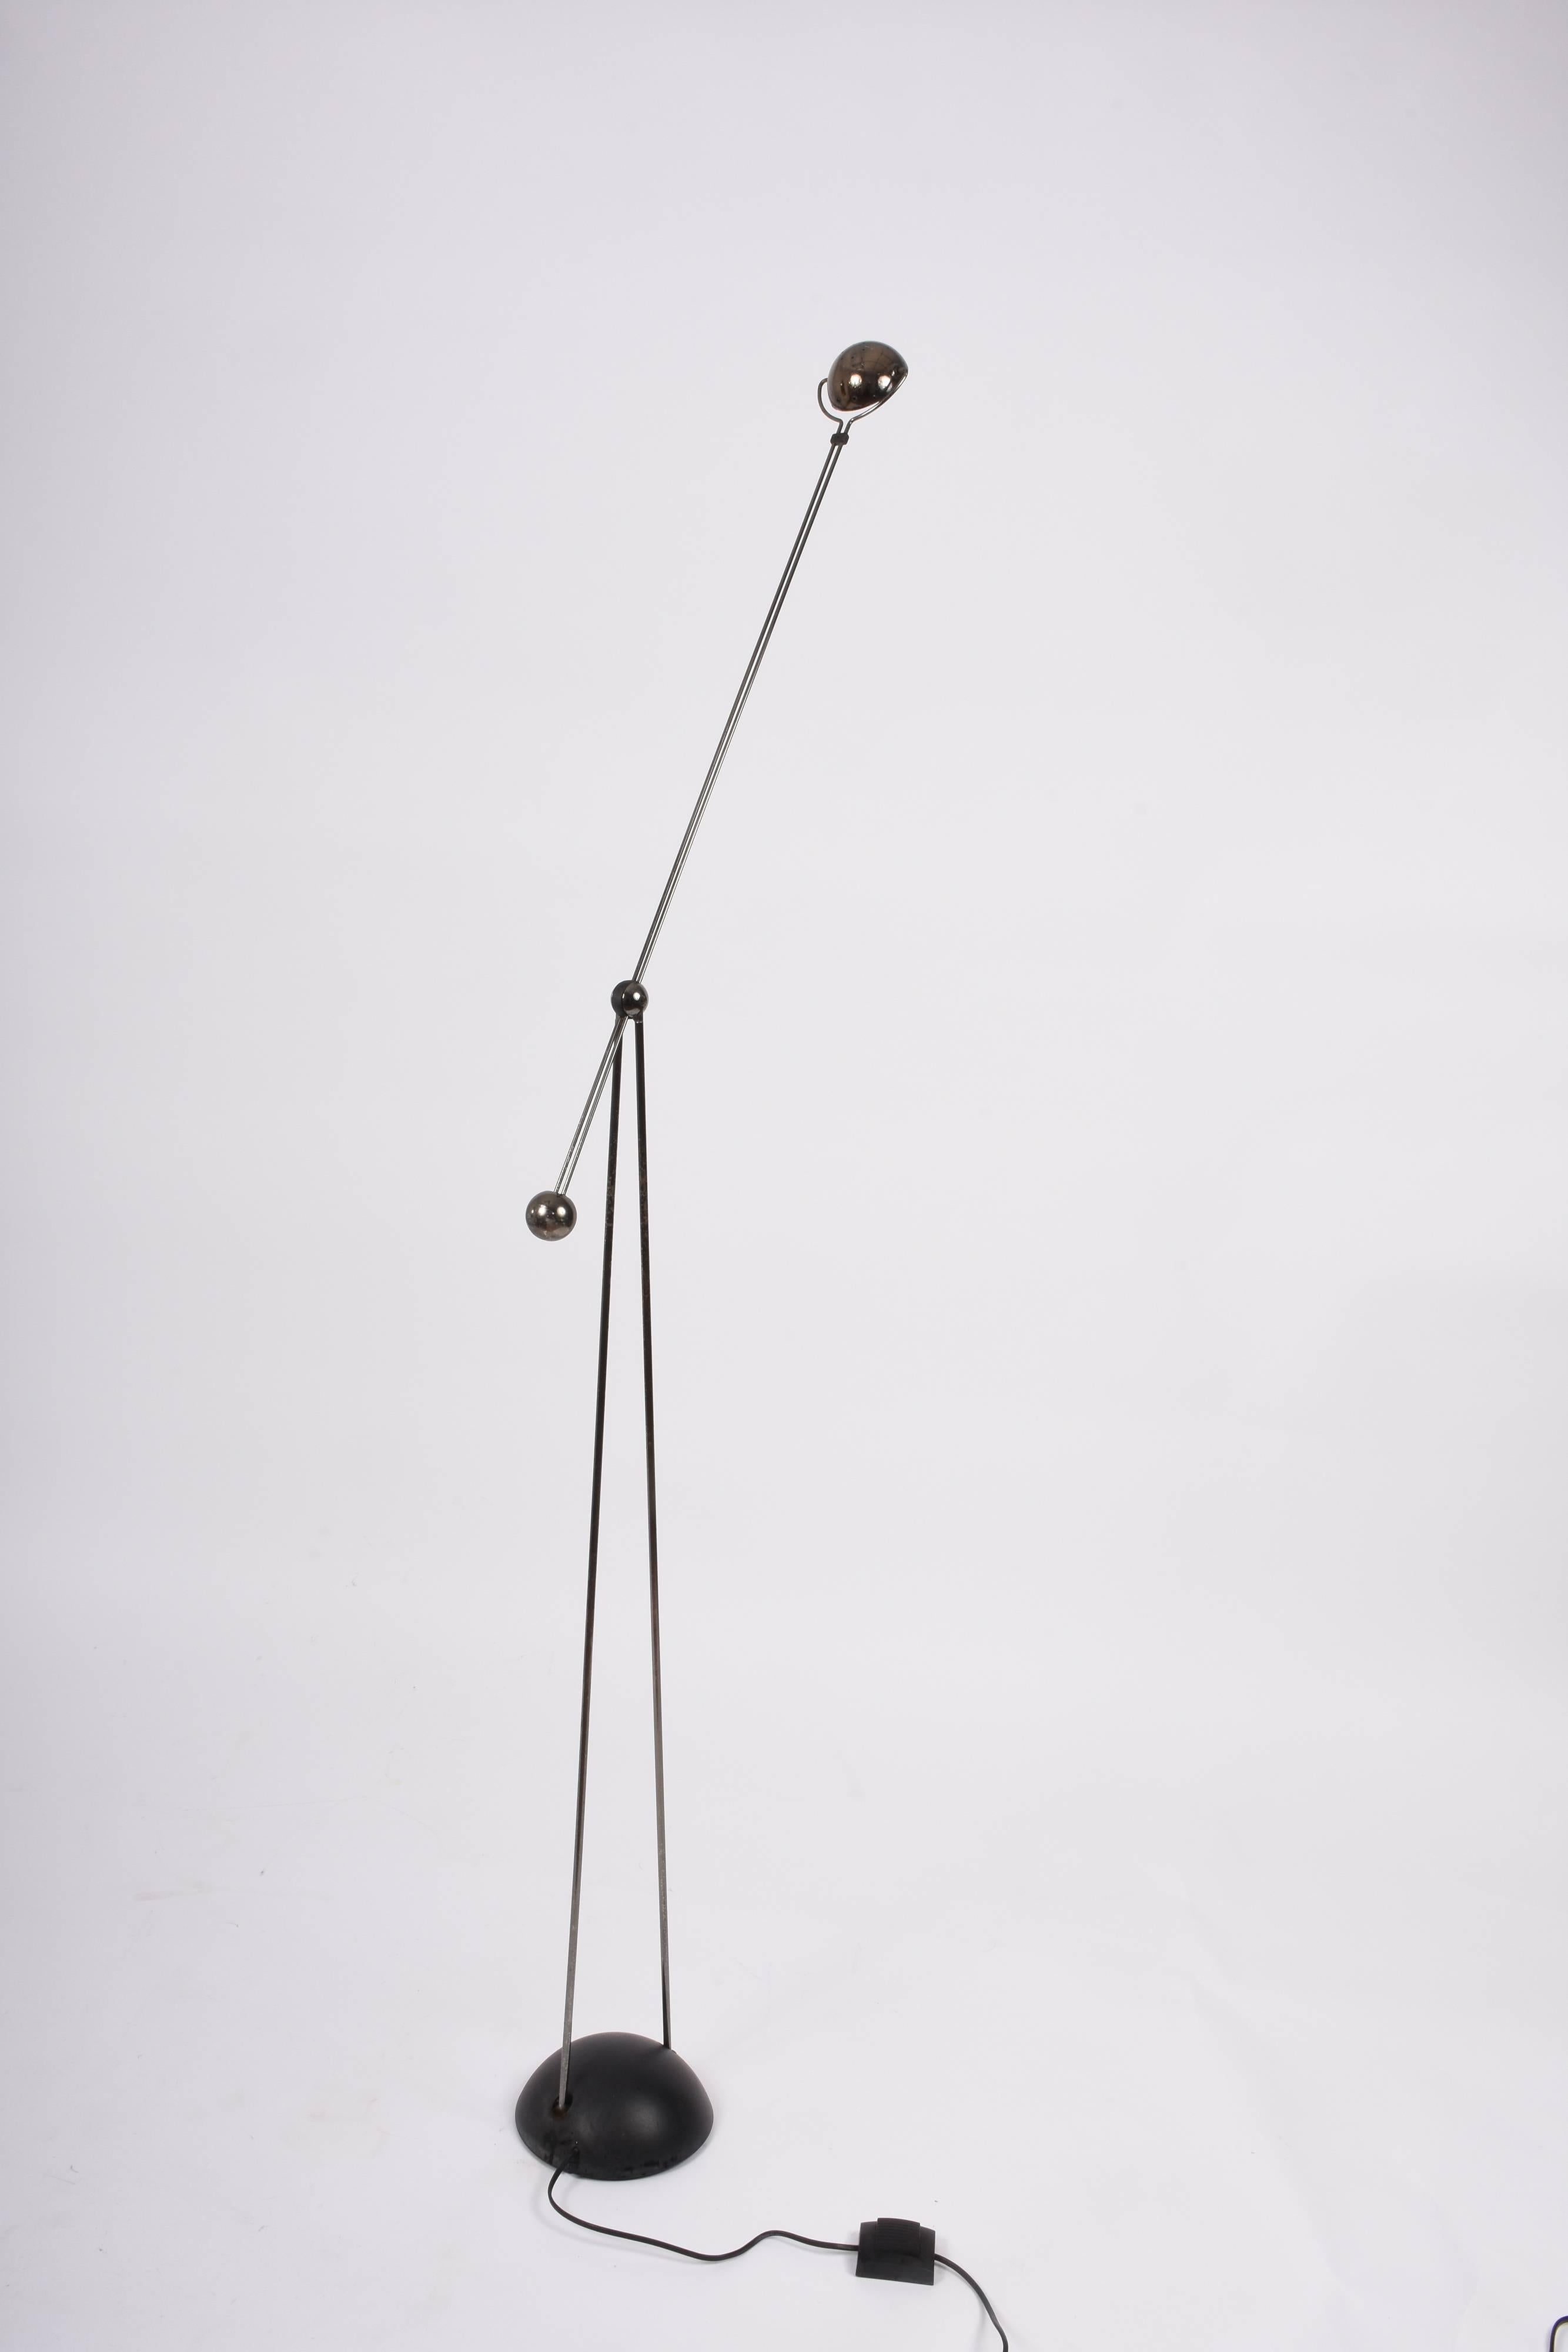 Midcentury metal floor lamp, designed by Paolo Francesco Piva for Stefano Cevoli in the 1980s.

This Minimalist, modern, tall and elegant counterweight halogen floor and wall lamp was designed in 1983 and is a rare example of elegance and